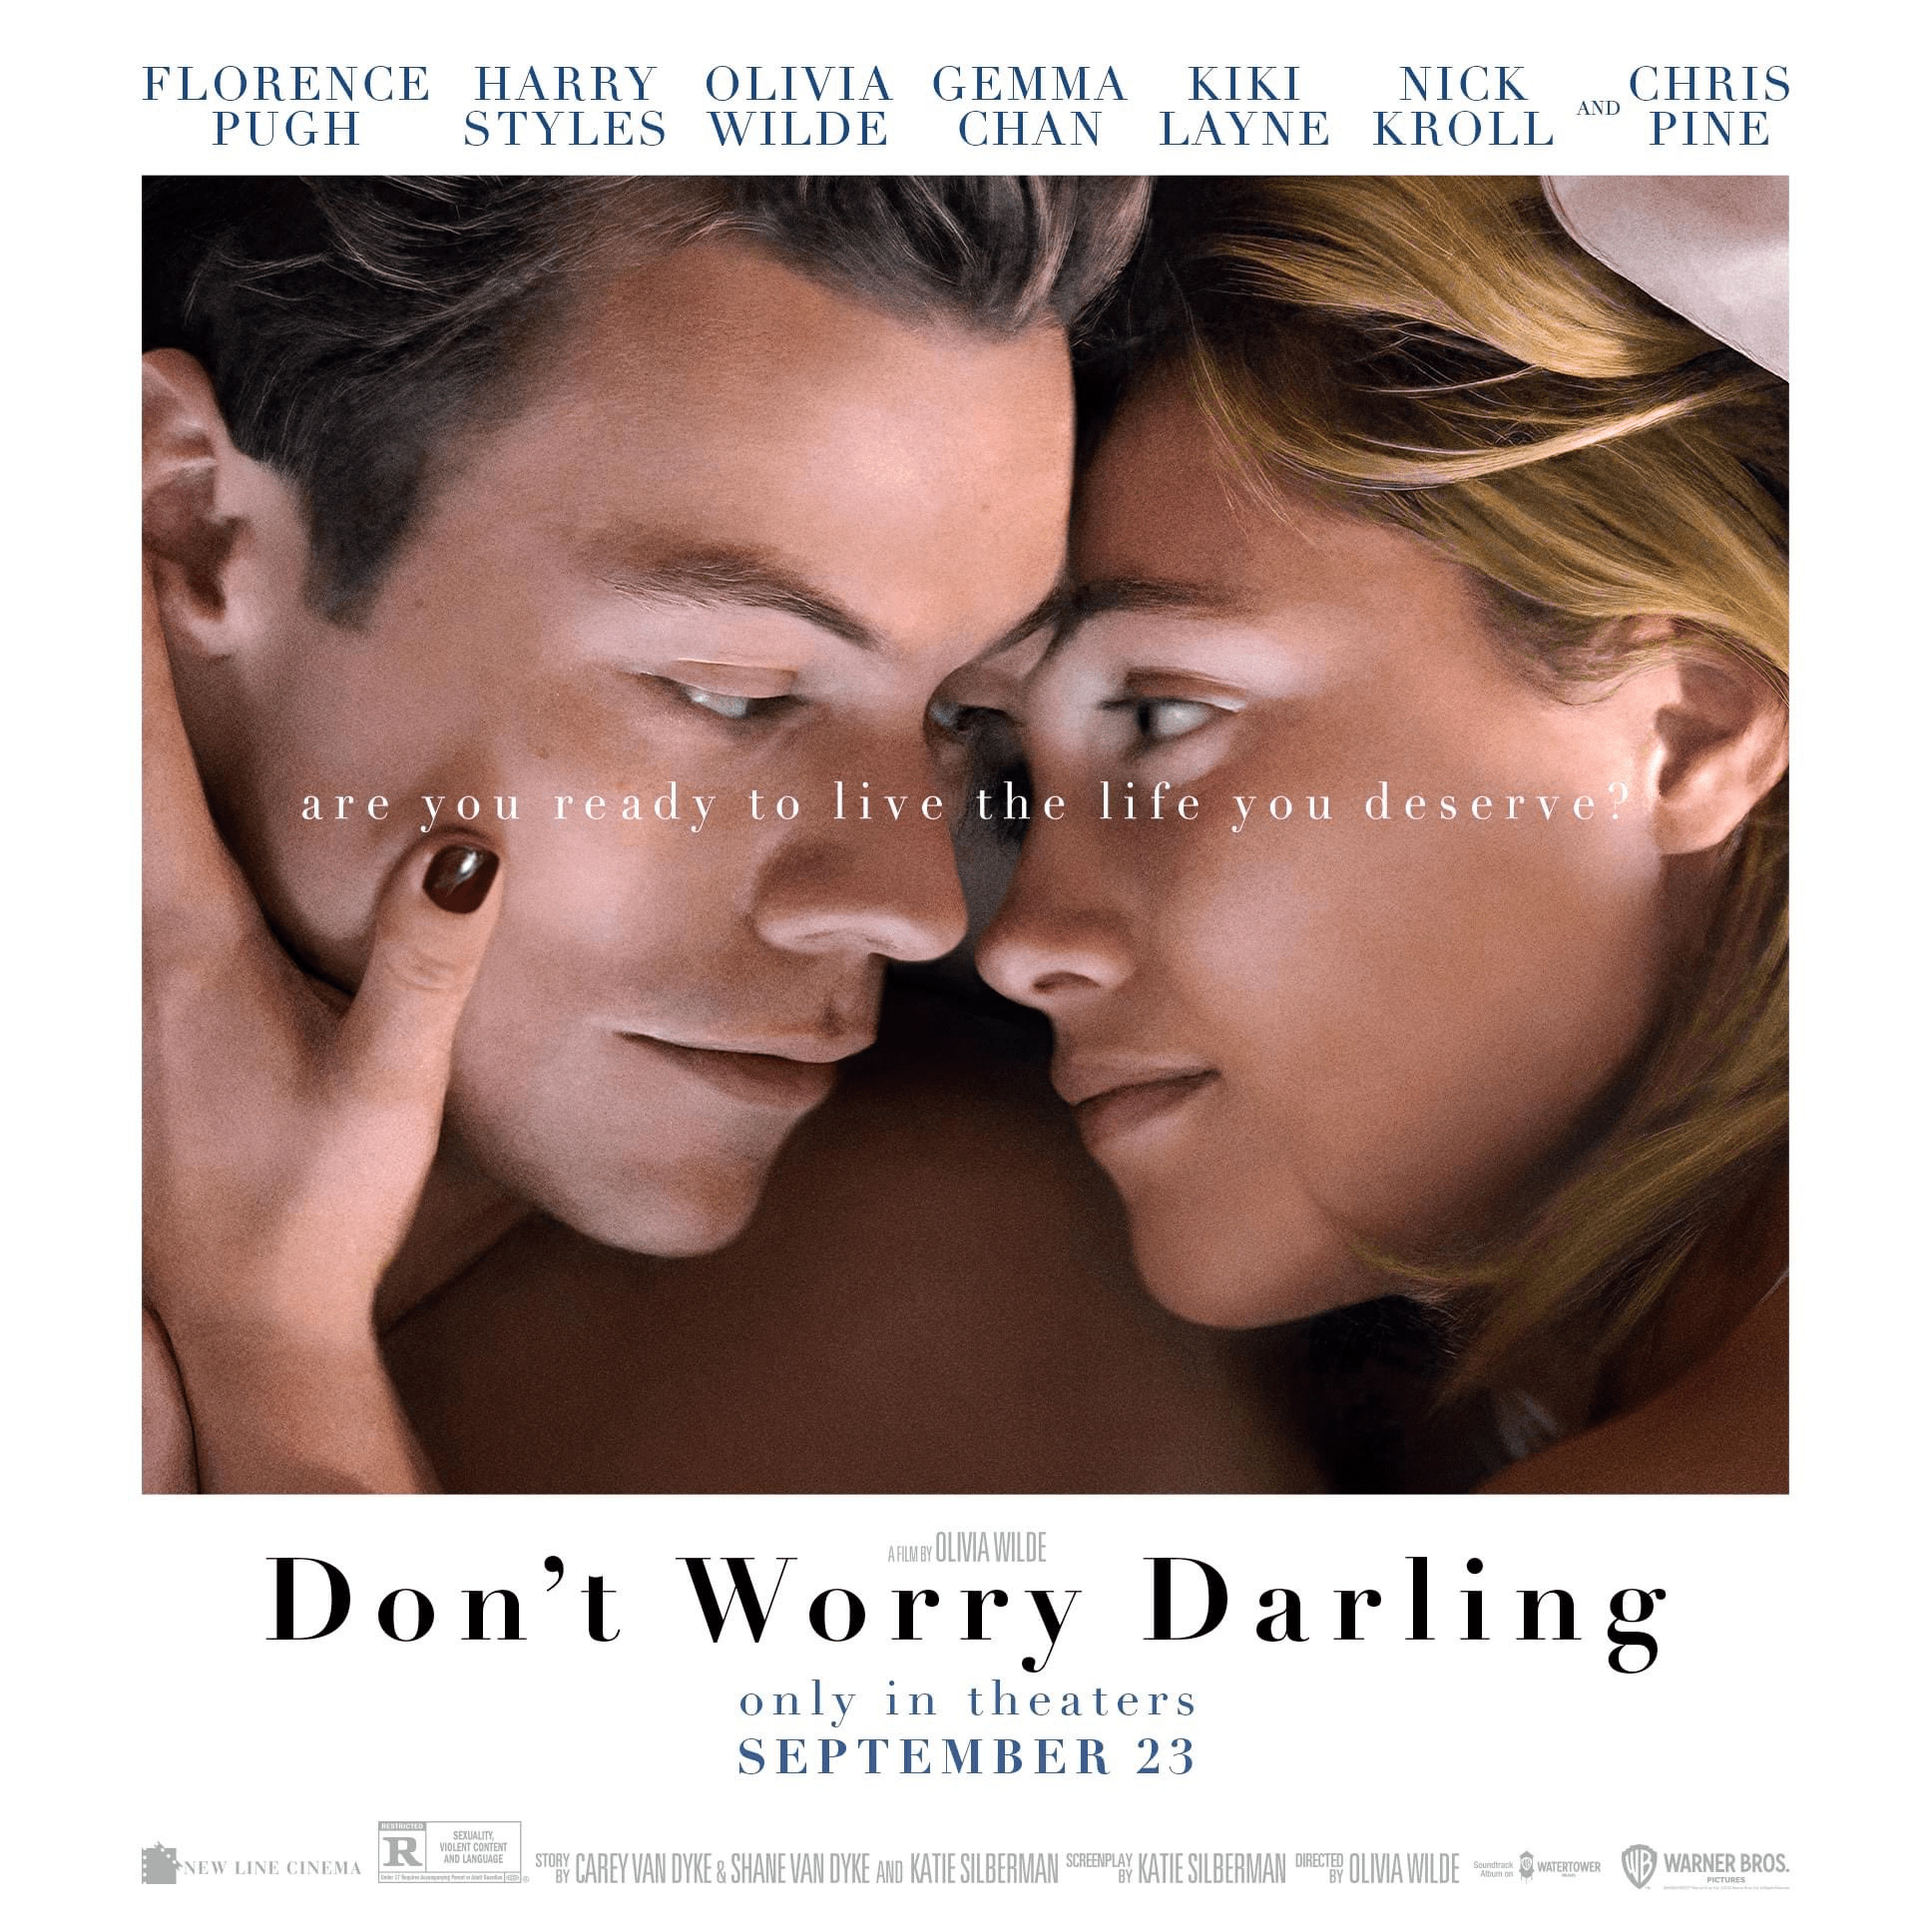 Don't Worry Darling' Poster Spotlights Florence Pugh and Harry Styles